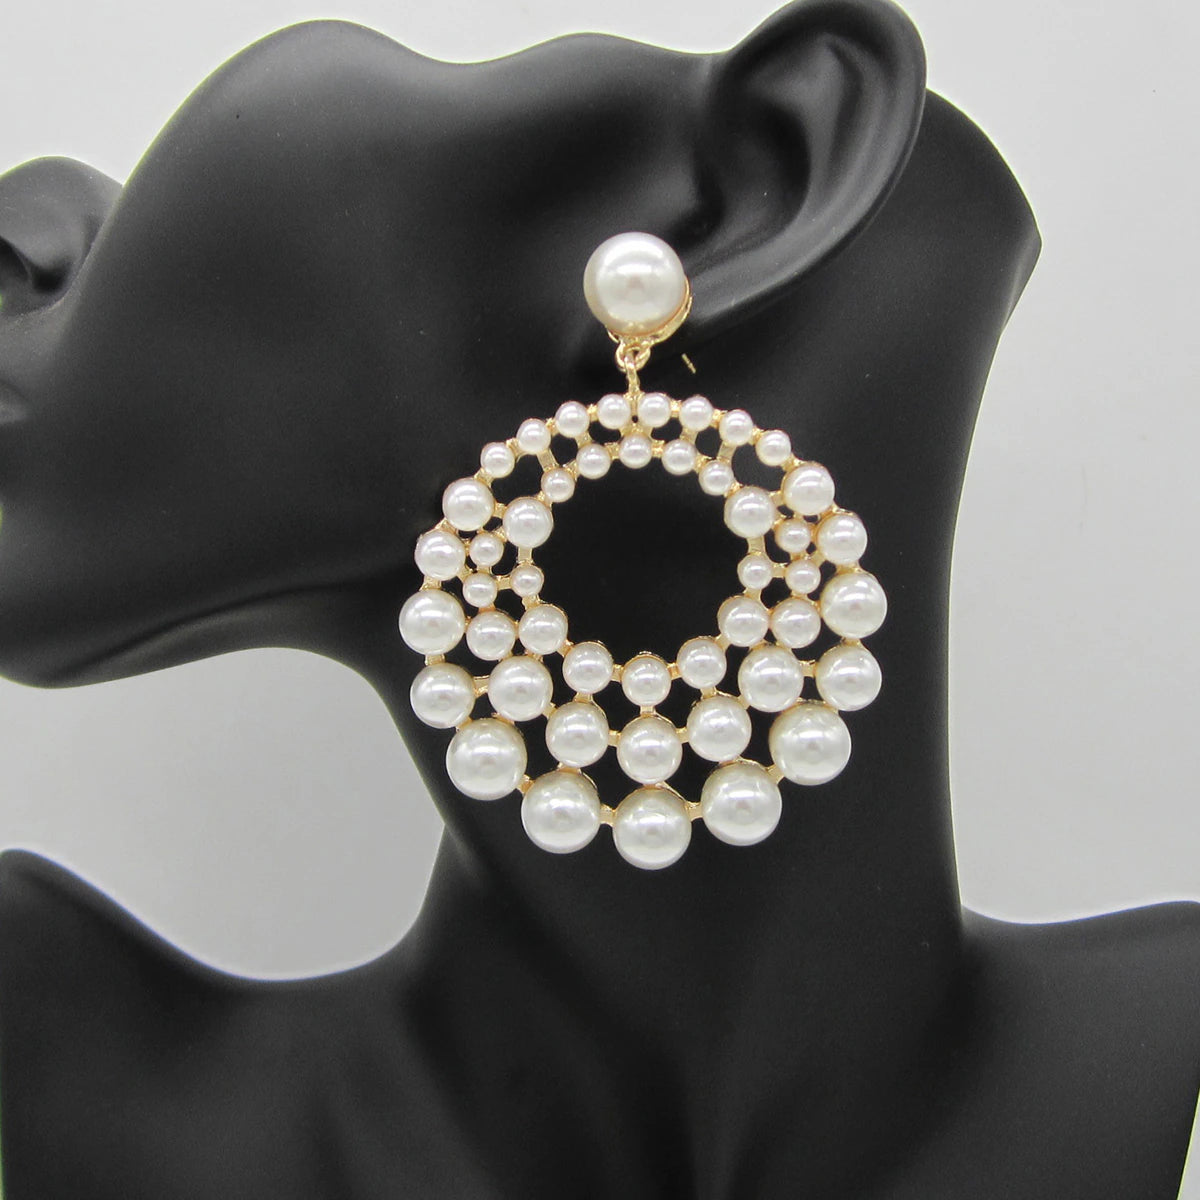 All New Glam Drop Shiny Pearly Beads Earrings Fashion Trendy Chic Jewelry